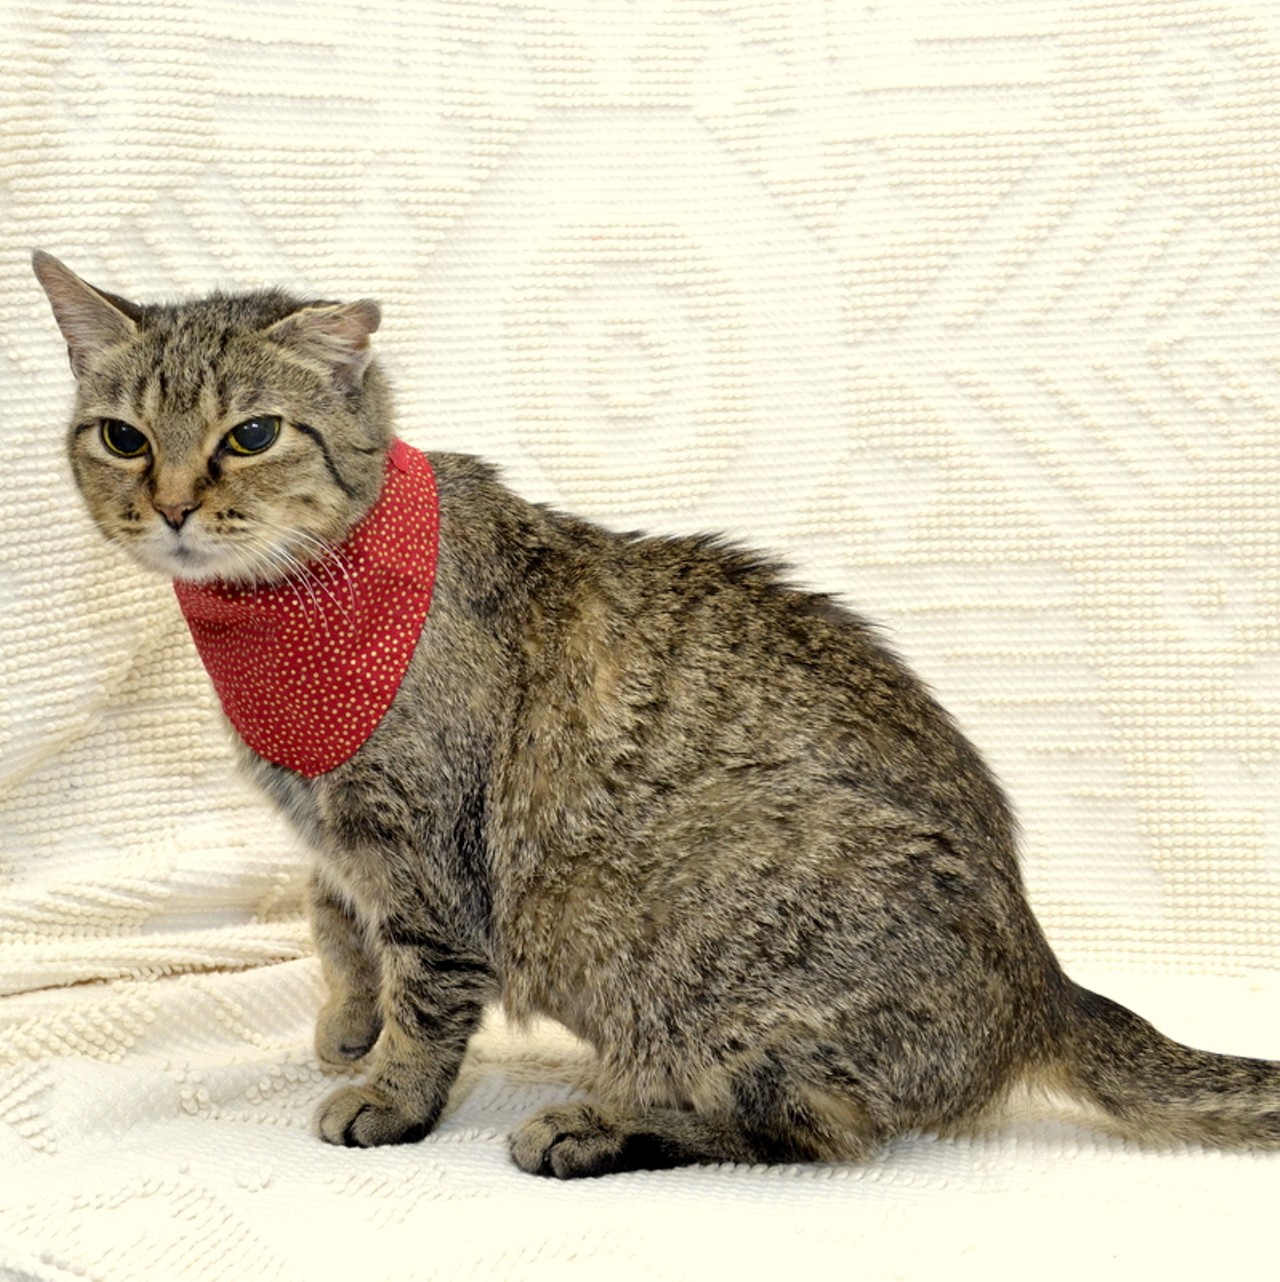 NAME: Tonks
GENDER: Female
BREED: Domestic Short Hair
AGE: 8 years, 1 month
WEIGHT: 8 pounds
SPECIAL CONSIDERATIONS: None
REASON I CAME TO MHS: Agency transfer
LOCATION: Petco of Sterling Heights
ID NUMBER: 863049